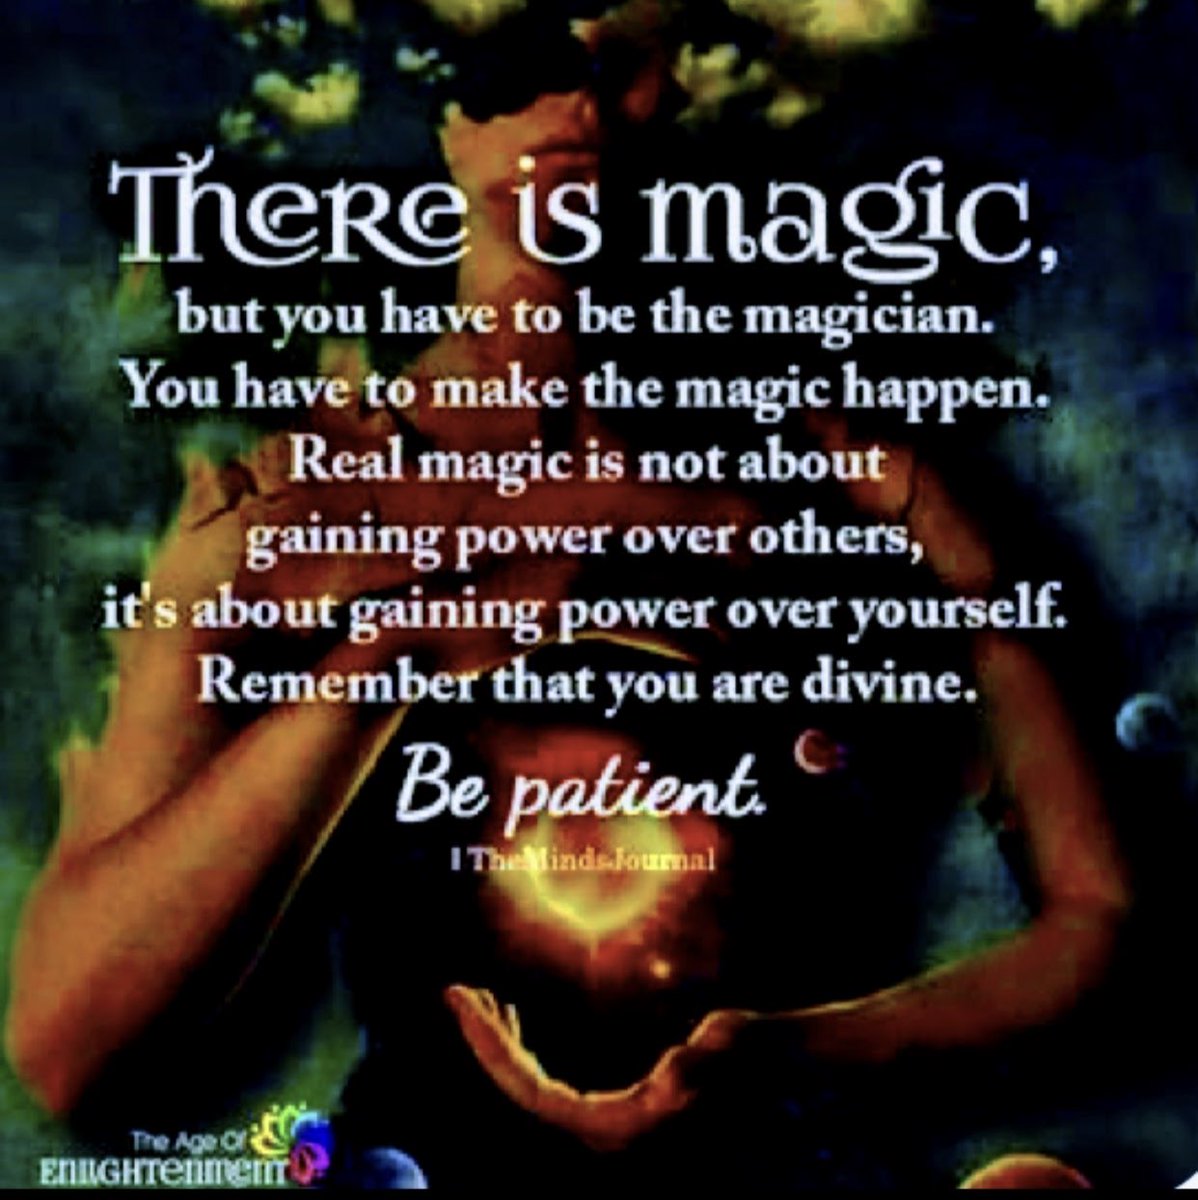 Happy Friday To All. Have A Magically Blessed Weekend 🙏🏽💚✨💜🙌🏼 There Is No Higher Power Than Being Yourself. You Are Magic In Motion. You Are Deeply Loved.  #youaredivine #youareenough #youareyou #youareabadass #bepatientwithyourself #belove #remembergratitudealways